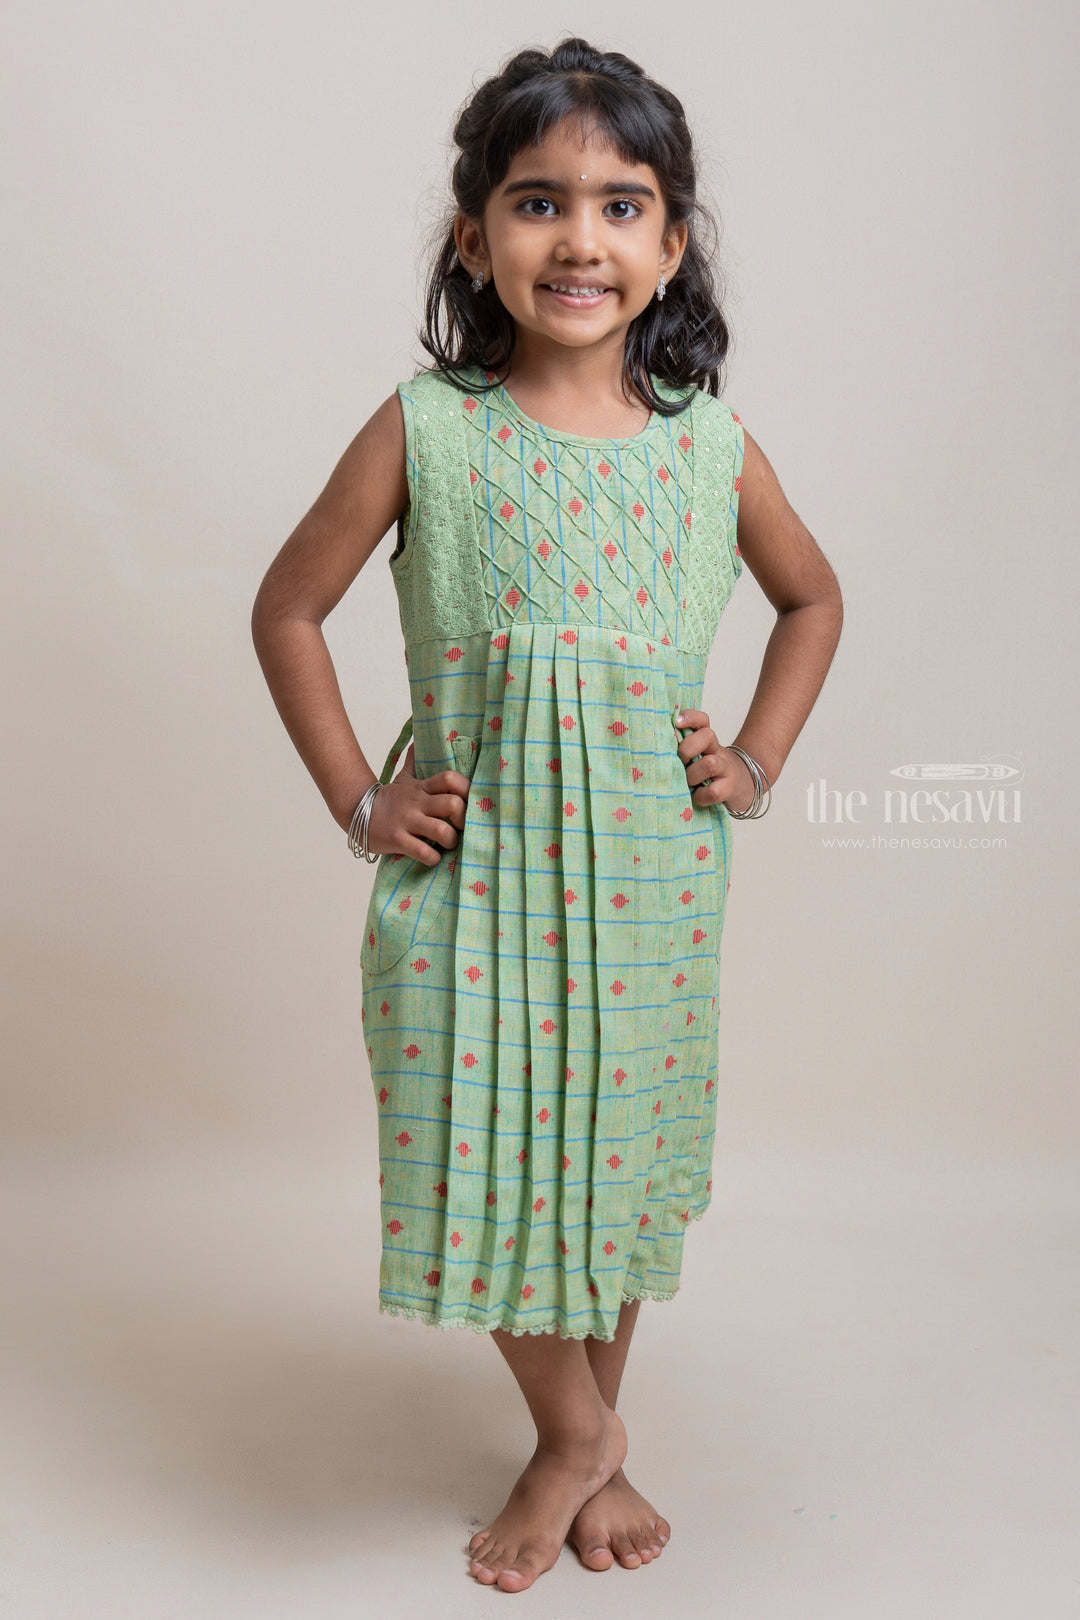 The Nesavu Girls Cotton Frock Adorable Green Sleeveless Butta Printed Slub Cotton Frock With Round Pockets For Girls Nesavu 16 (1Y) / Green / Cotton GFC985A-16 High Quality Cotton Dresses For Girls | Latest Girls Collection | The Nesavu